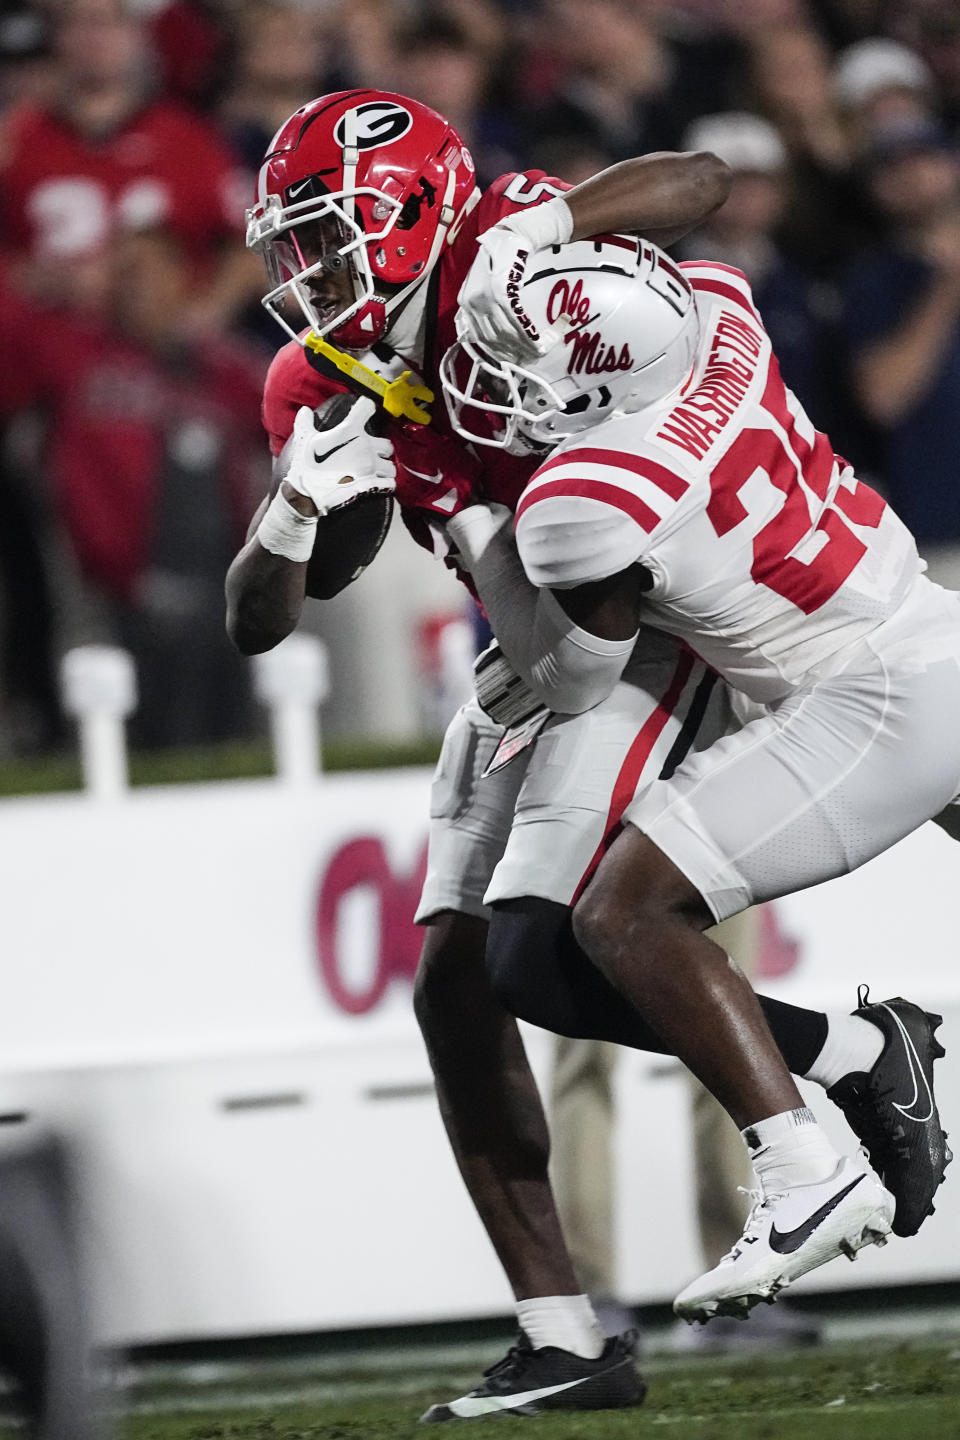 Georgia wide receiver Rara Thomas (5) tries to fend off Mississippi safety Nick Cull (29) after a catchduring the first half of an NCAA college football game, Saturday, Nov. 11, 2023, in Athens, Ga. (AP Photo/John Bazemore)